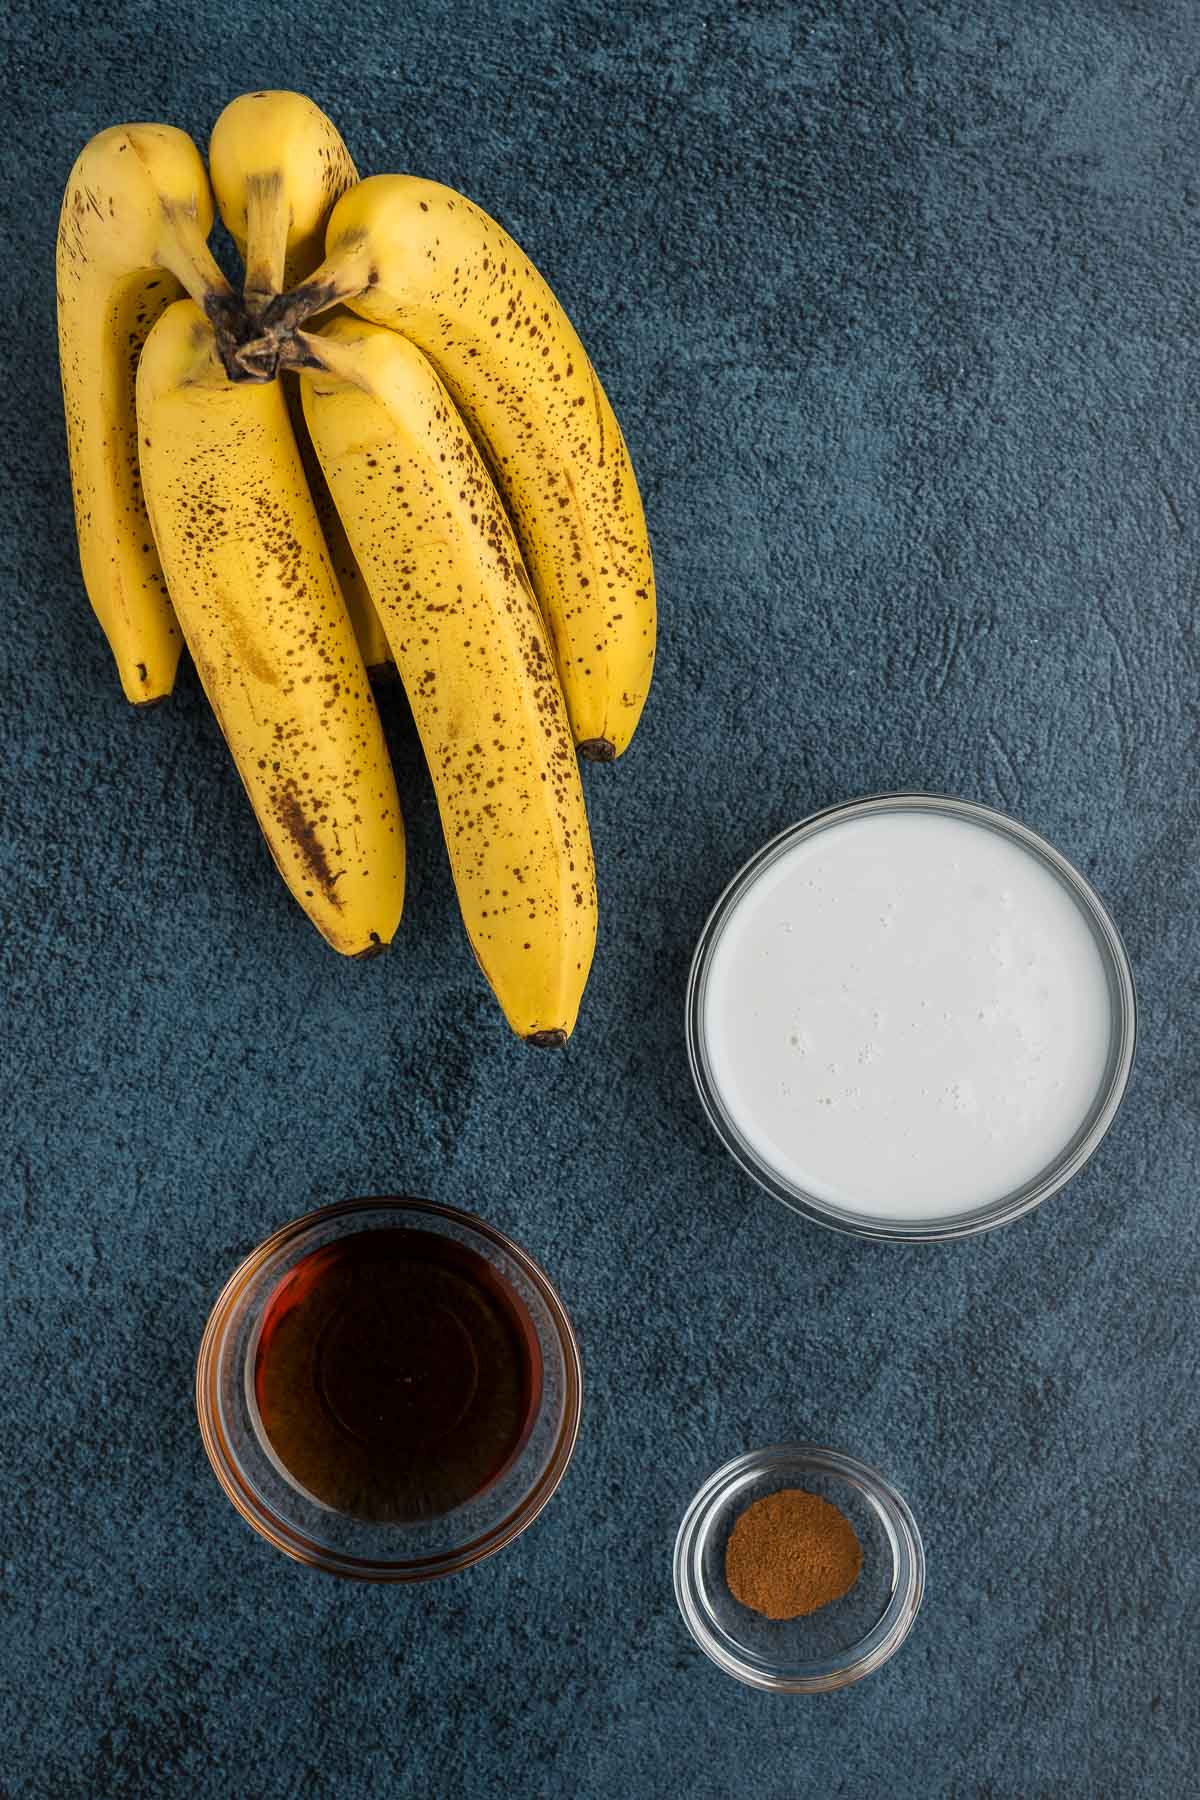 banana popsicle ingredients including banana, coconut milk, maple syrup and cinnamon